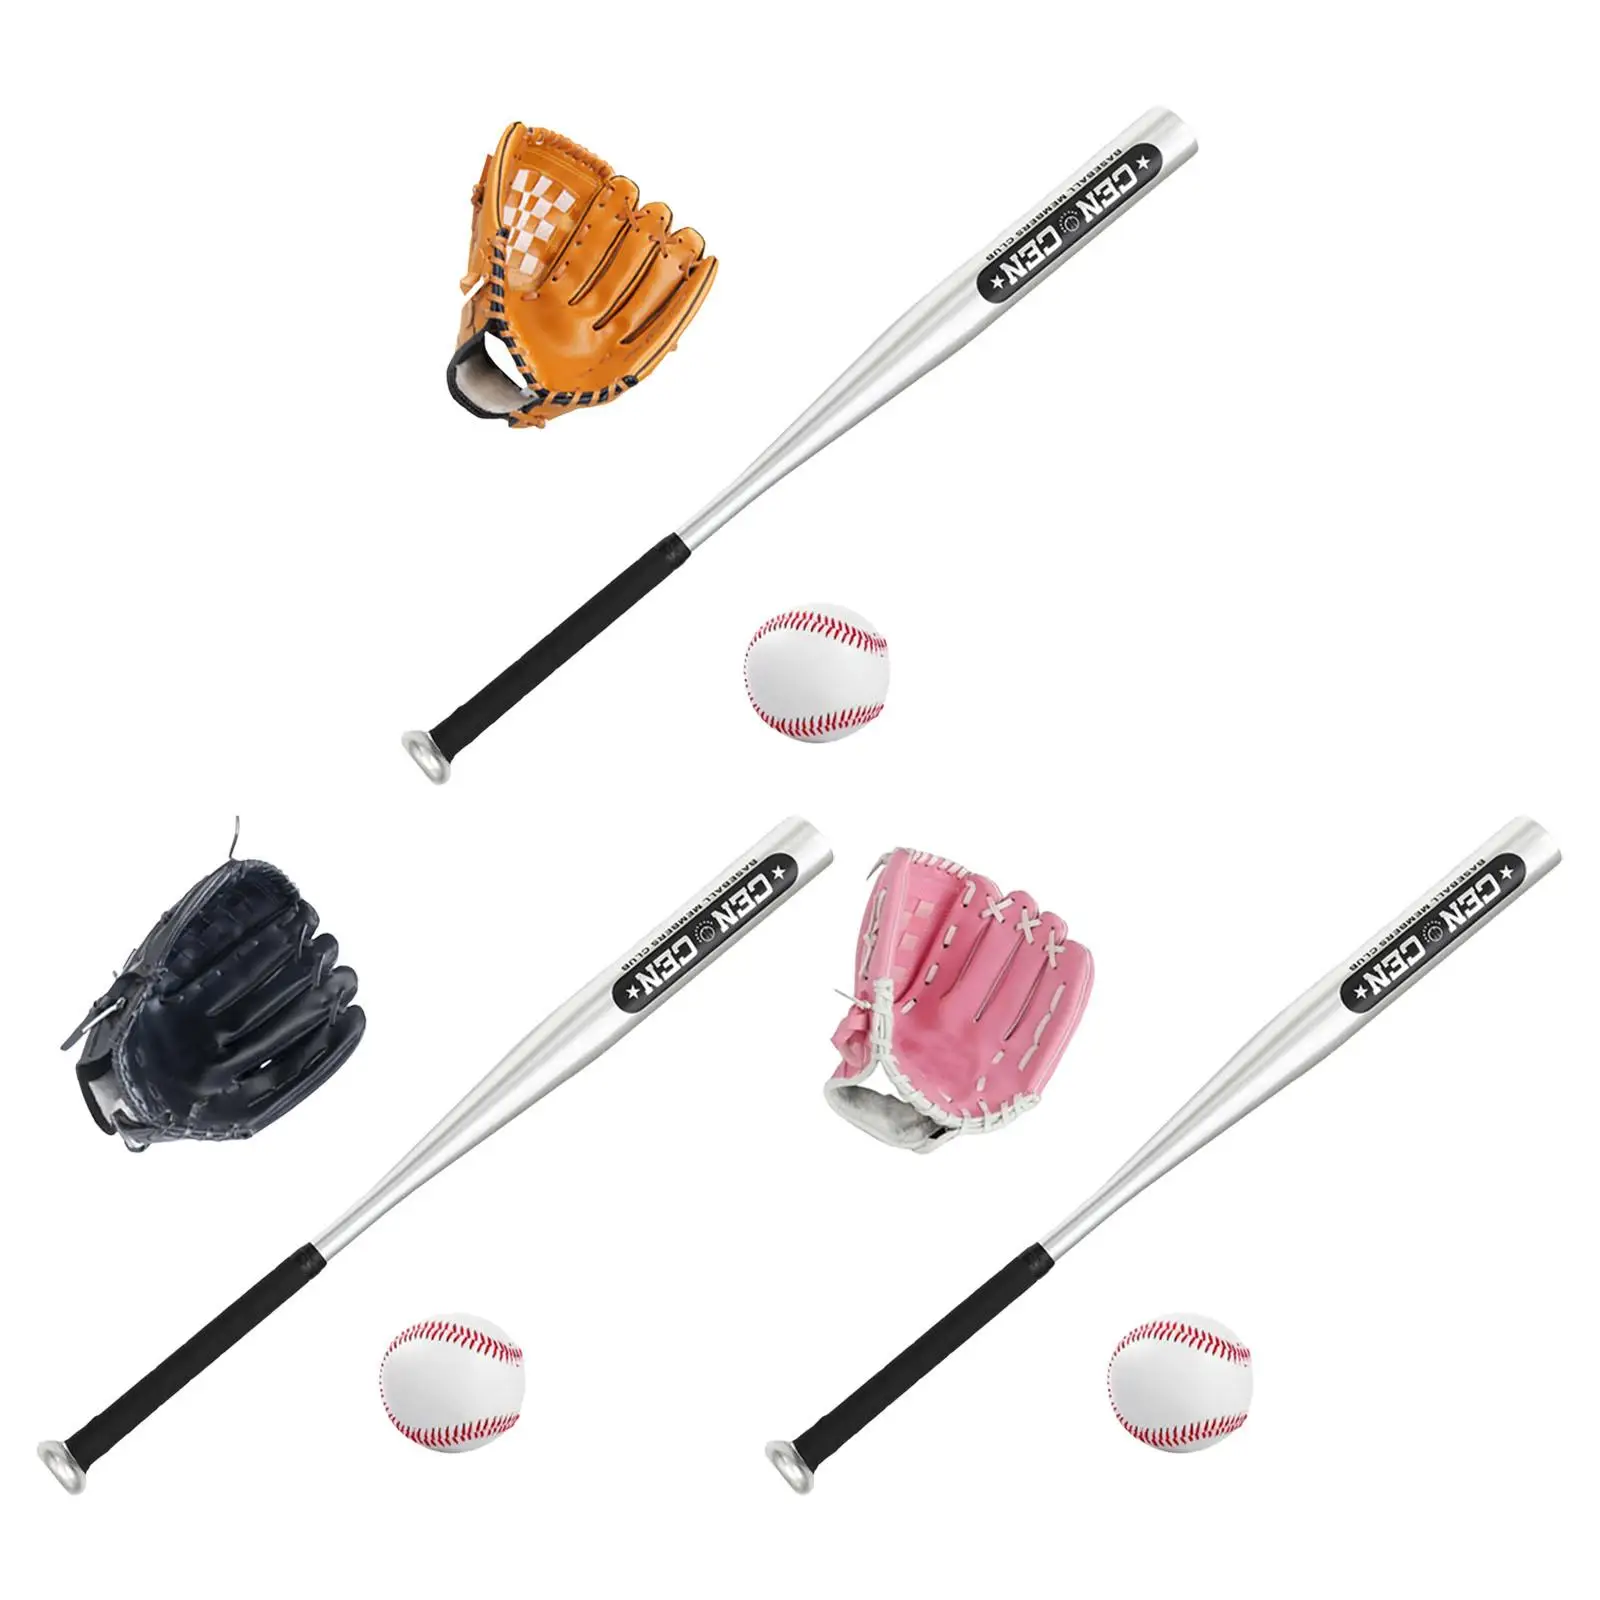 Baseball Bat Set with Baseball Glove and Ball Traing Pactise Playing Game Trainer Softball for Home Outdoor Kids Teenagers Youth